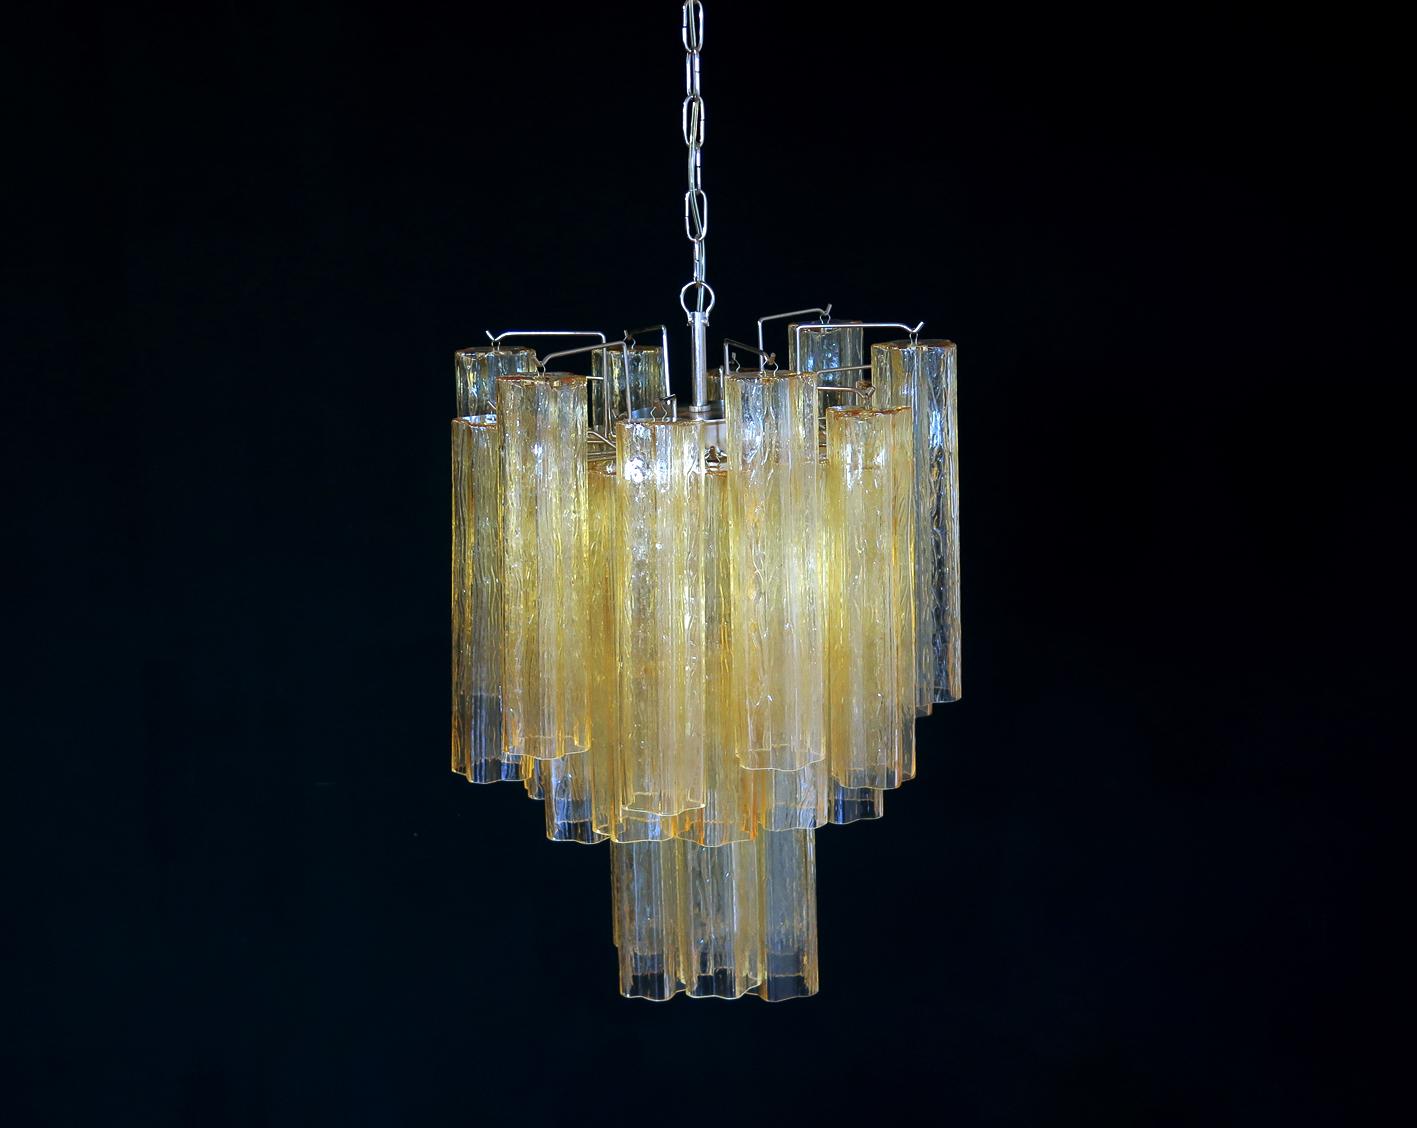 Trio Gold Glass Tube Chandeliers, Murano, 1970s For Sale 4